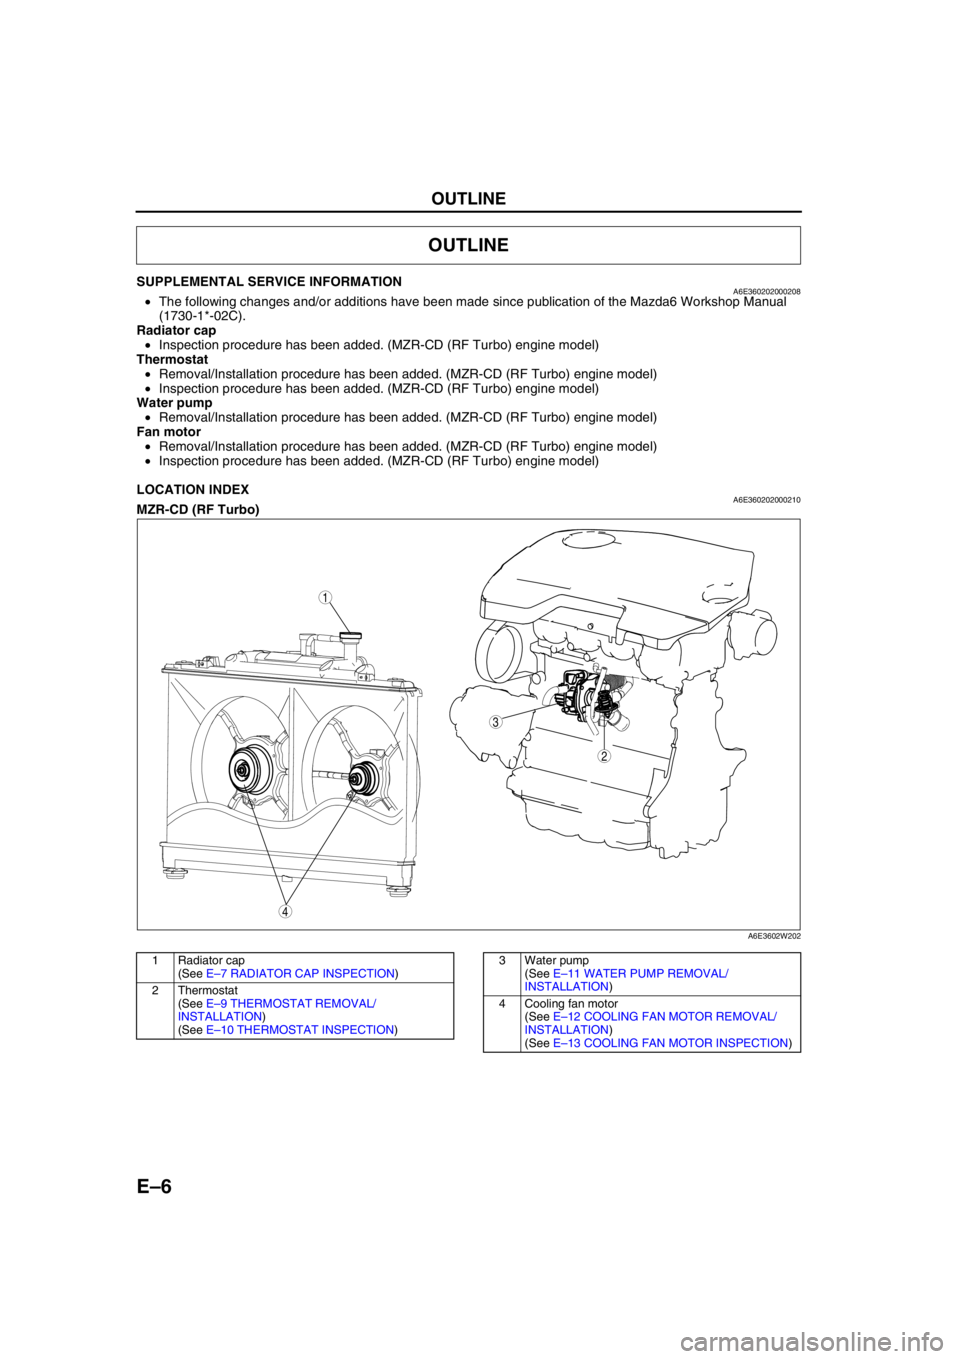 MAZDA 6 2002  Workshop Manual Suplement E–6
OUTLINE 
SUPPLEMENTAL SERVICE INFORMATIONA6E360202000208•The following changes and/or additions have been made since publication of the Mazda6 Workshop Manual 
(1730-1*-02C).
Radiator cap
•I